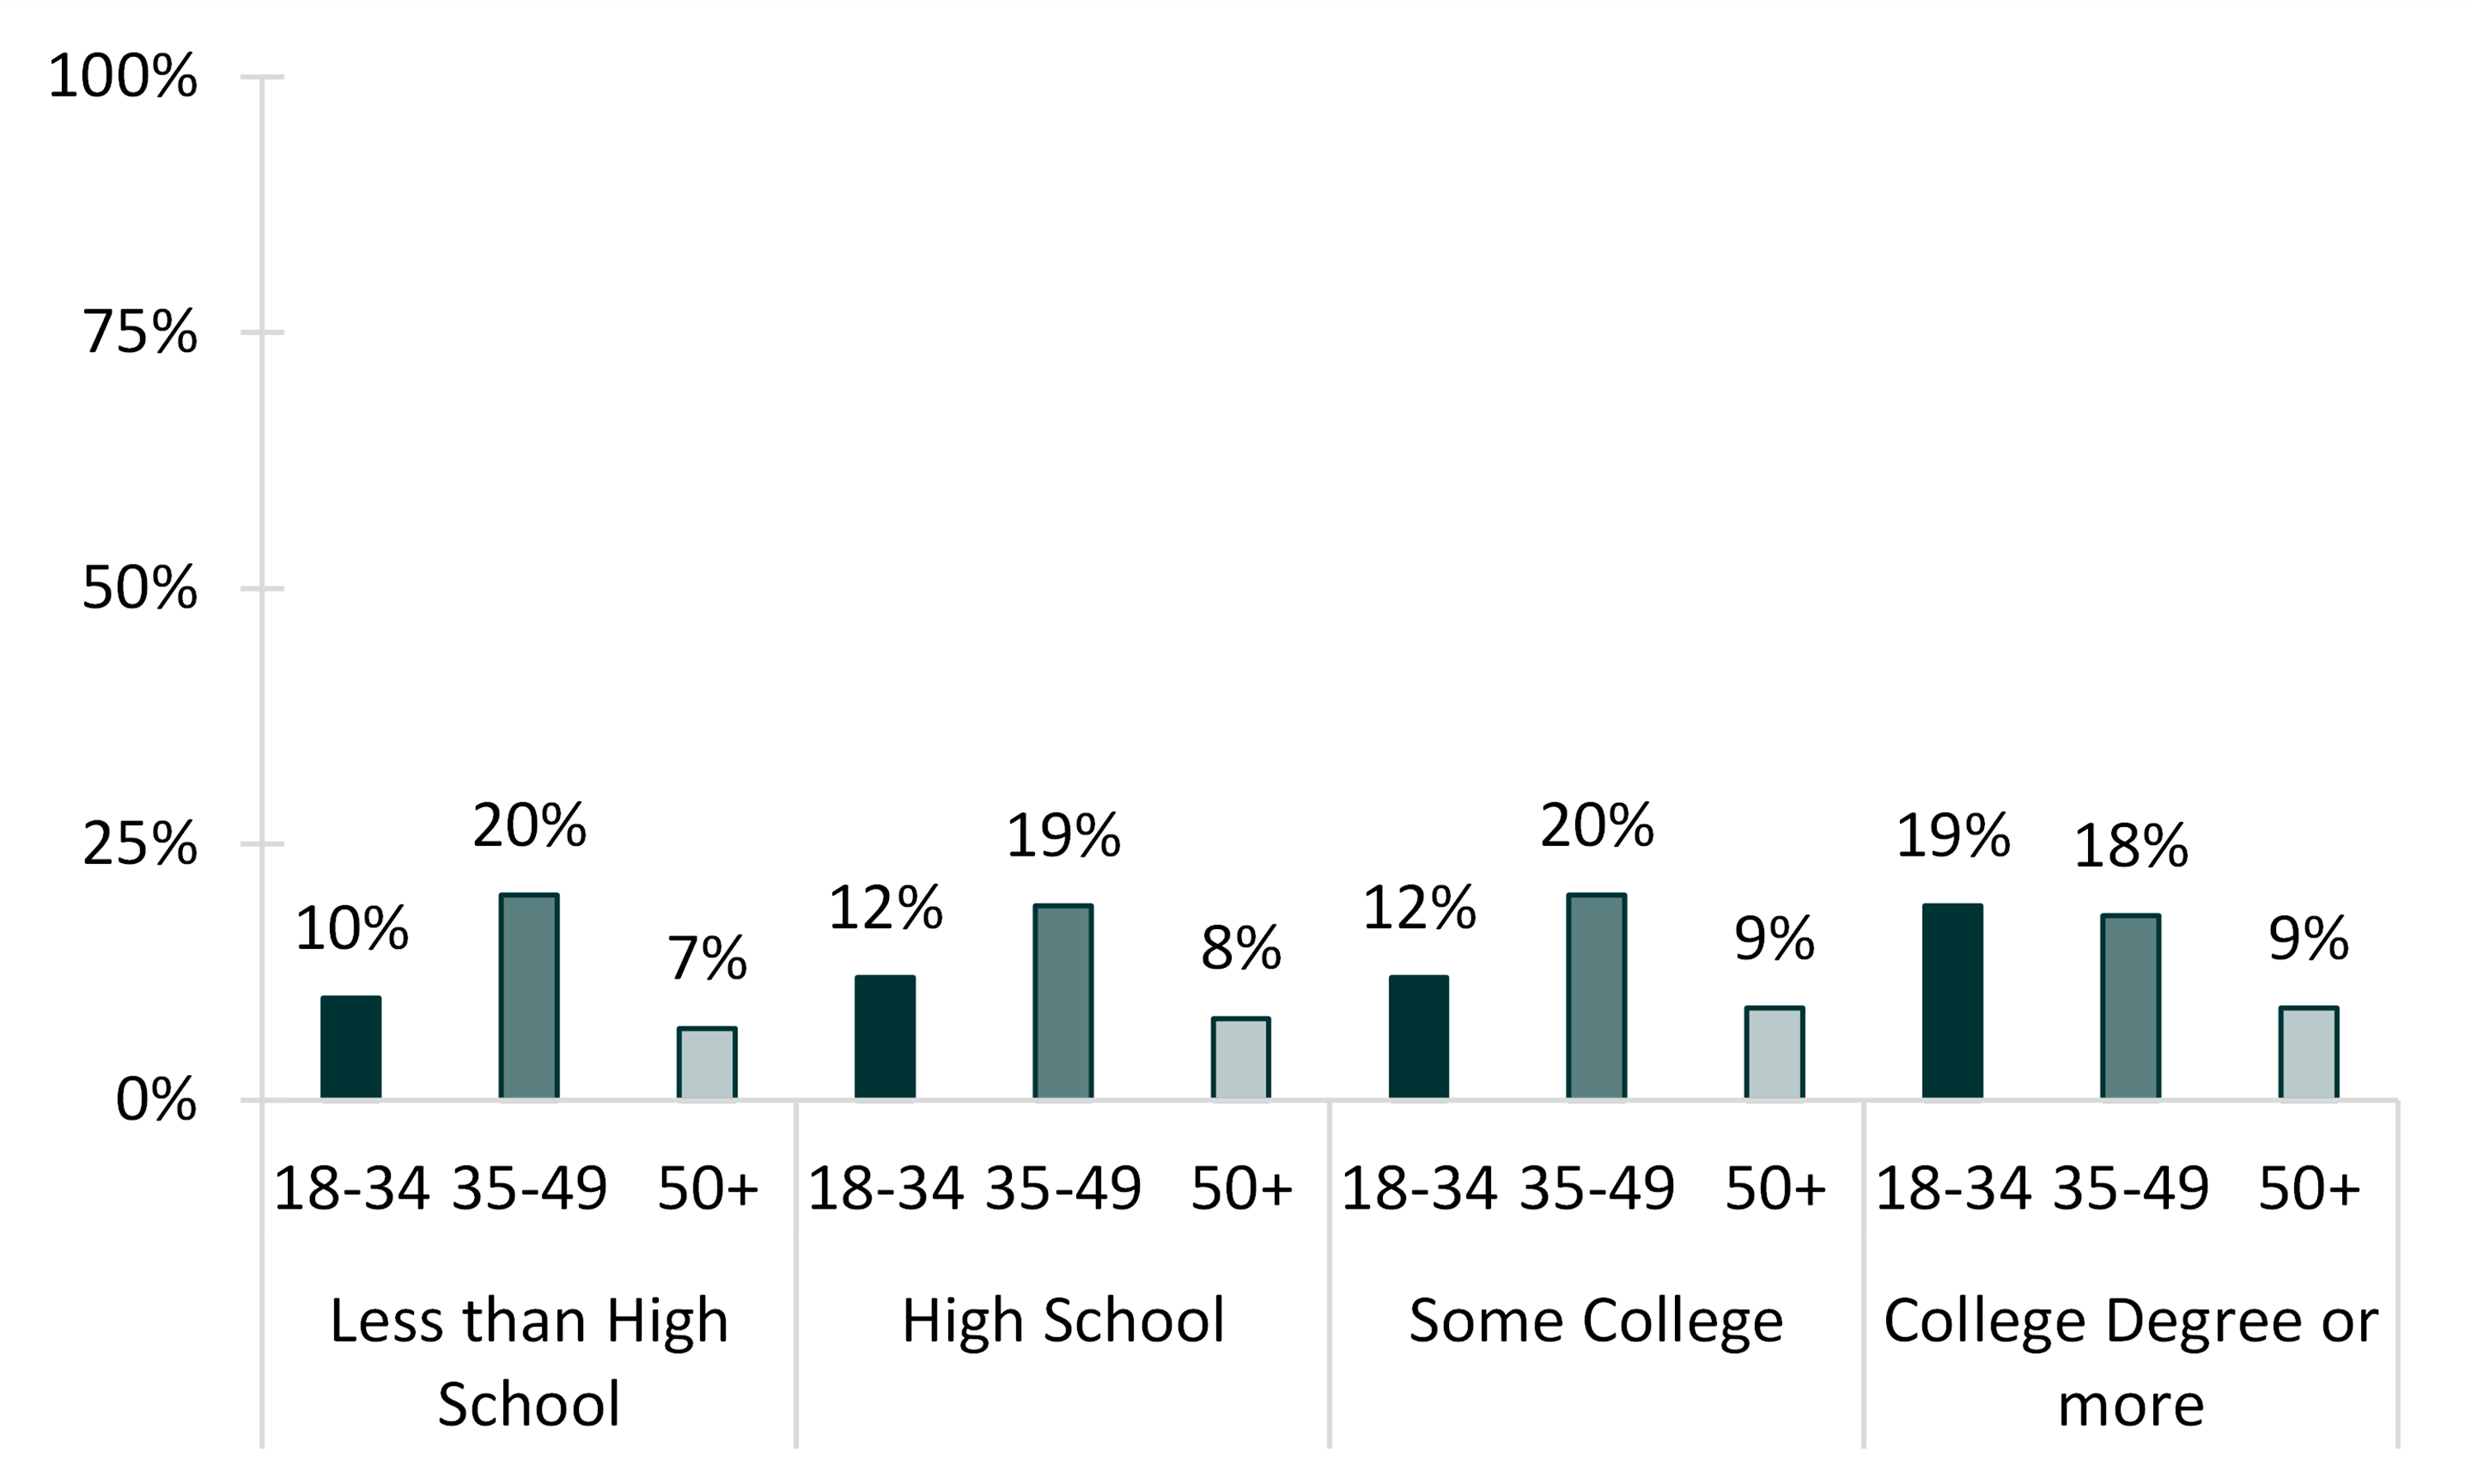 teal bar chart showing Figure 2: Percentage of Unmarried Individuals Cohabiting, by Education and Age Group, 2018